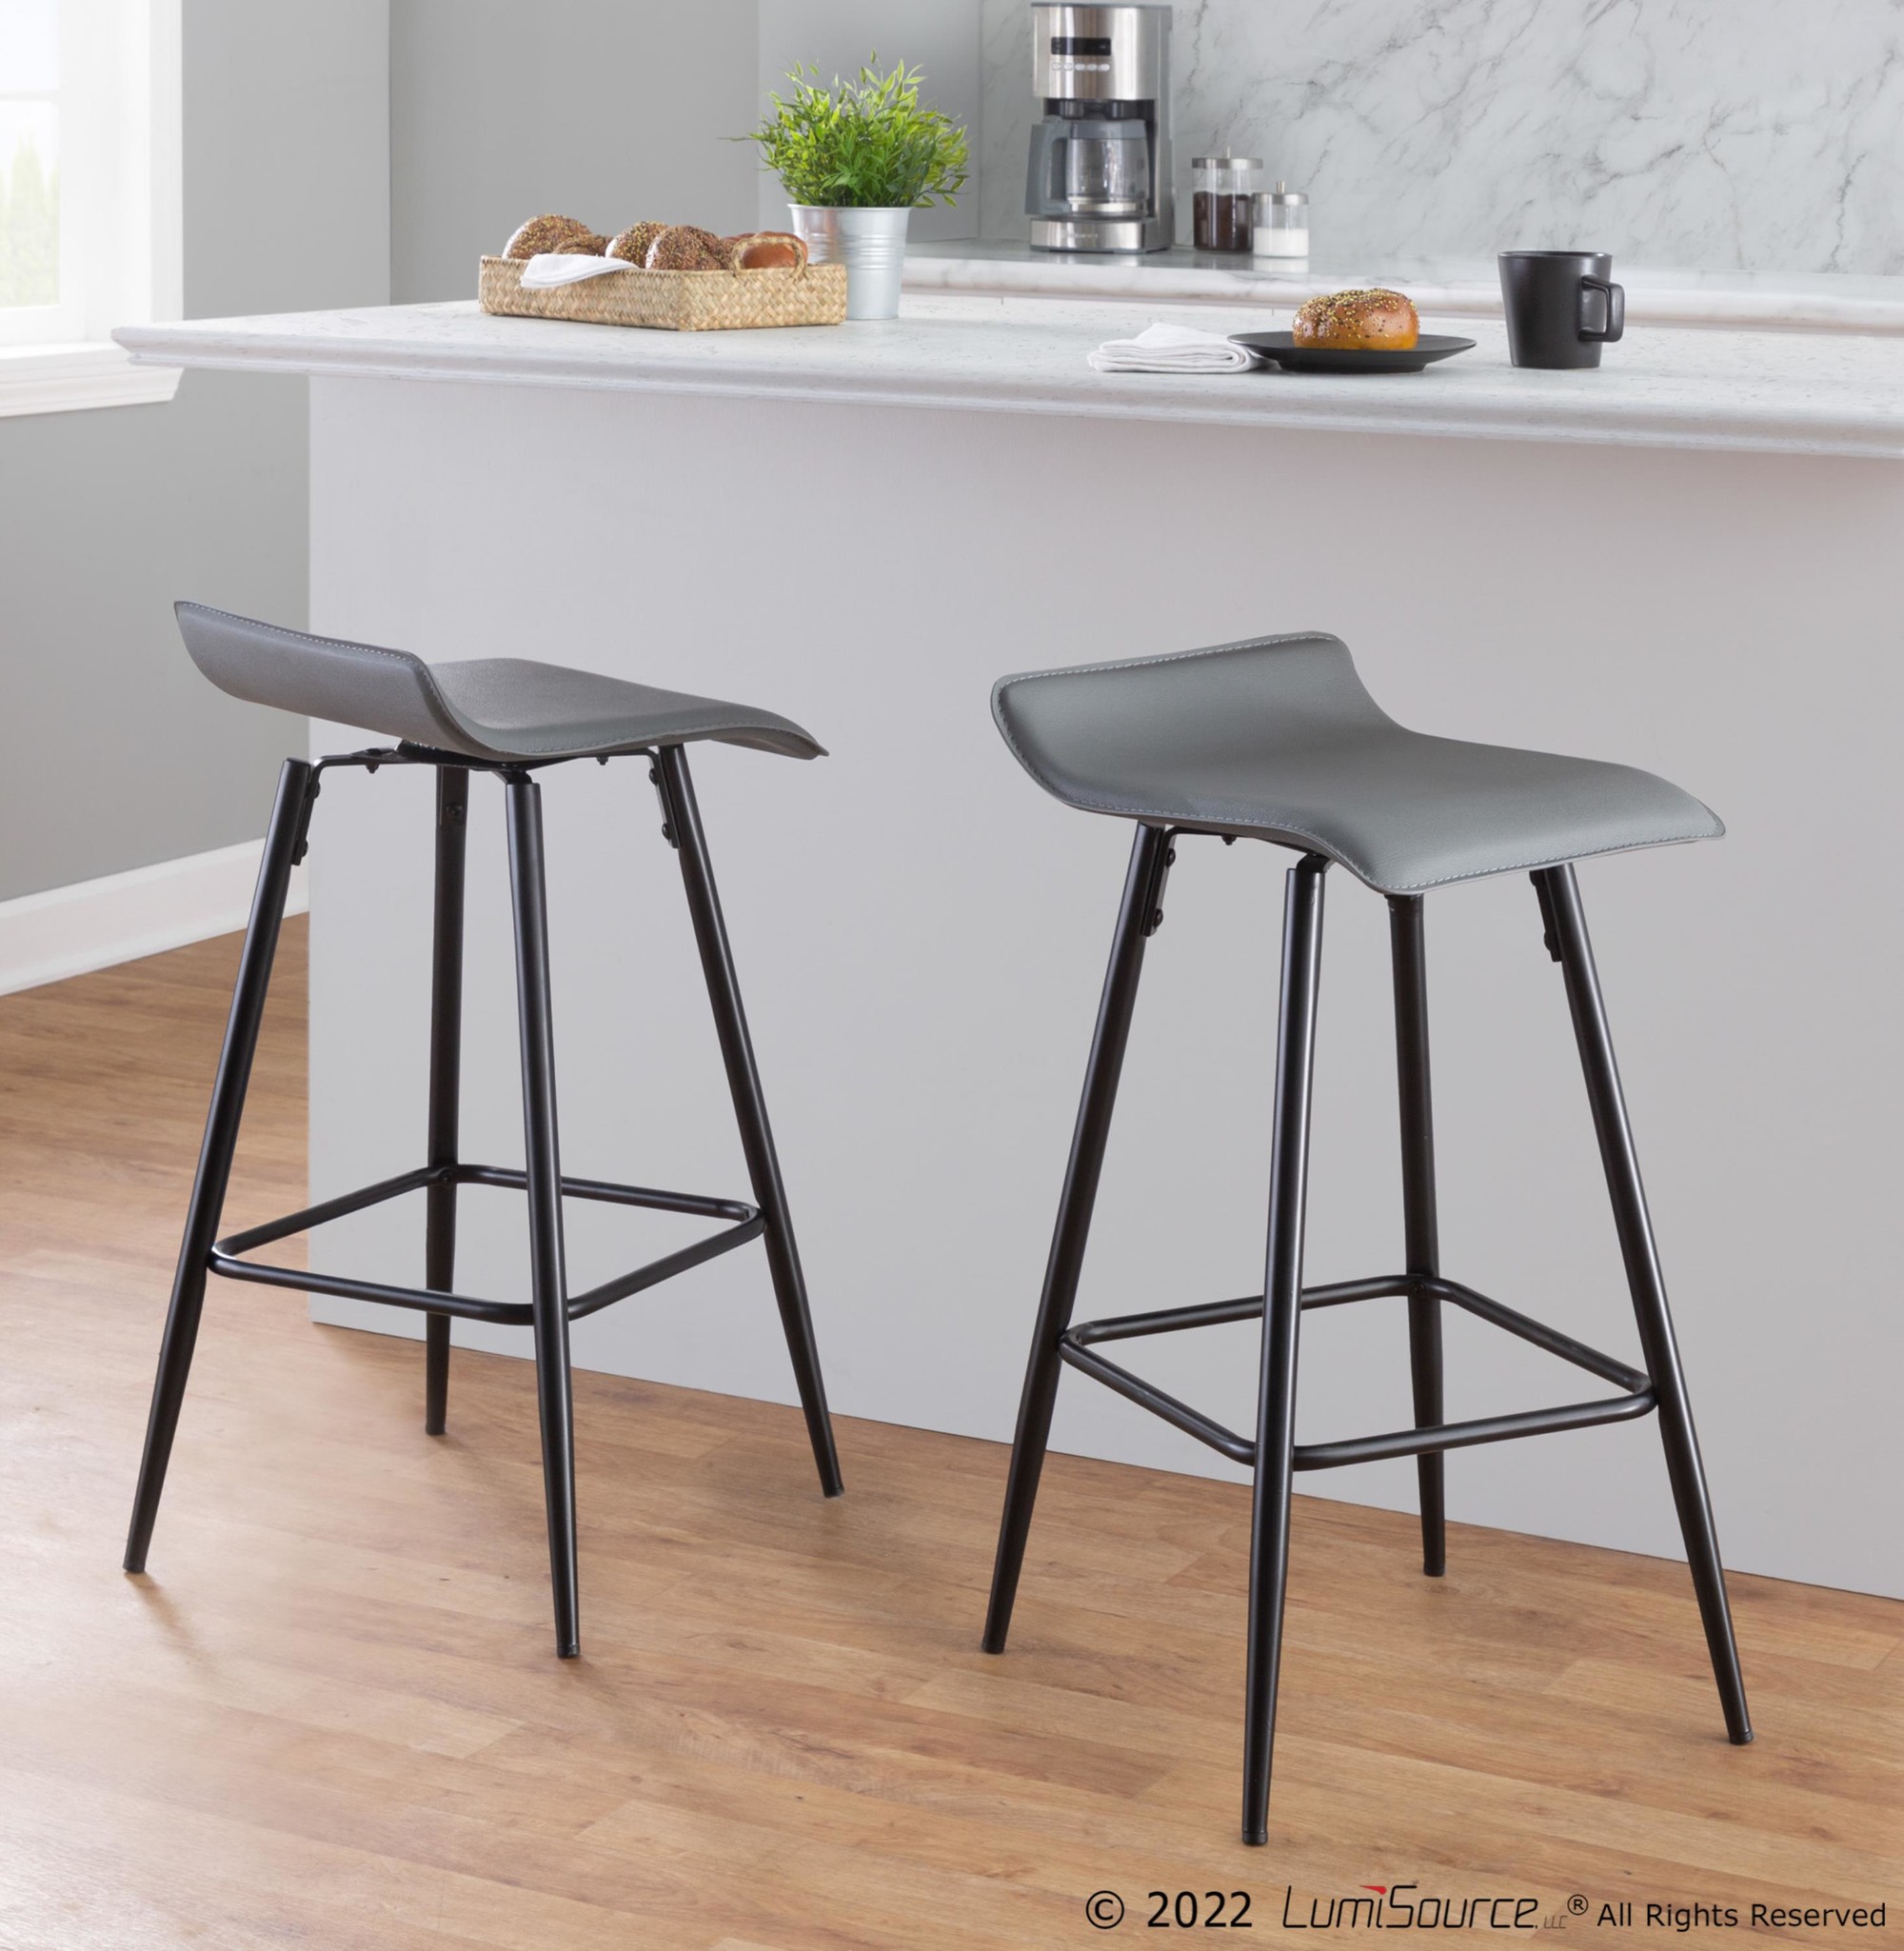 Ale 26" Fixed-height Counter Stool - Set Of 2